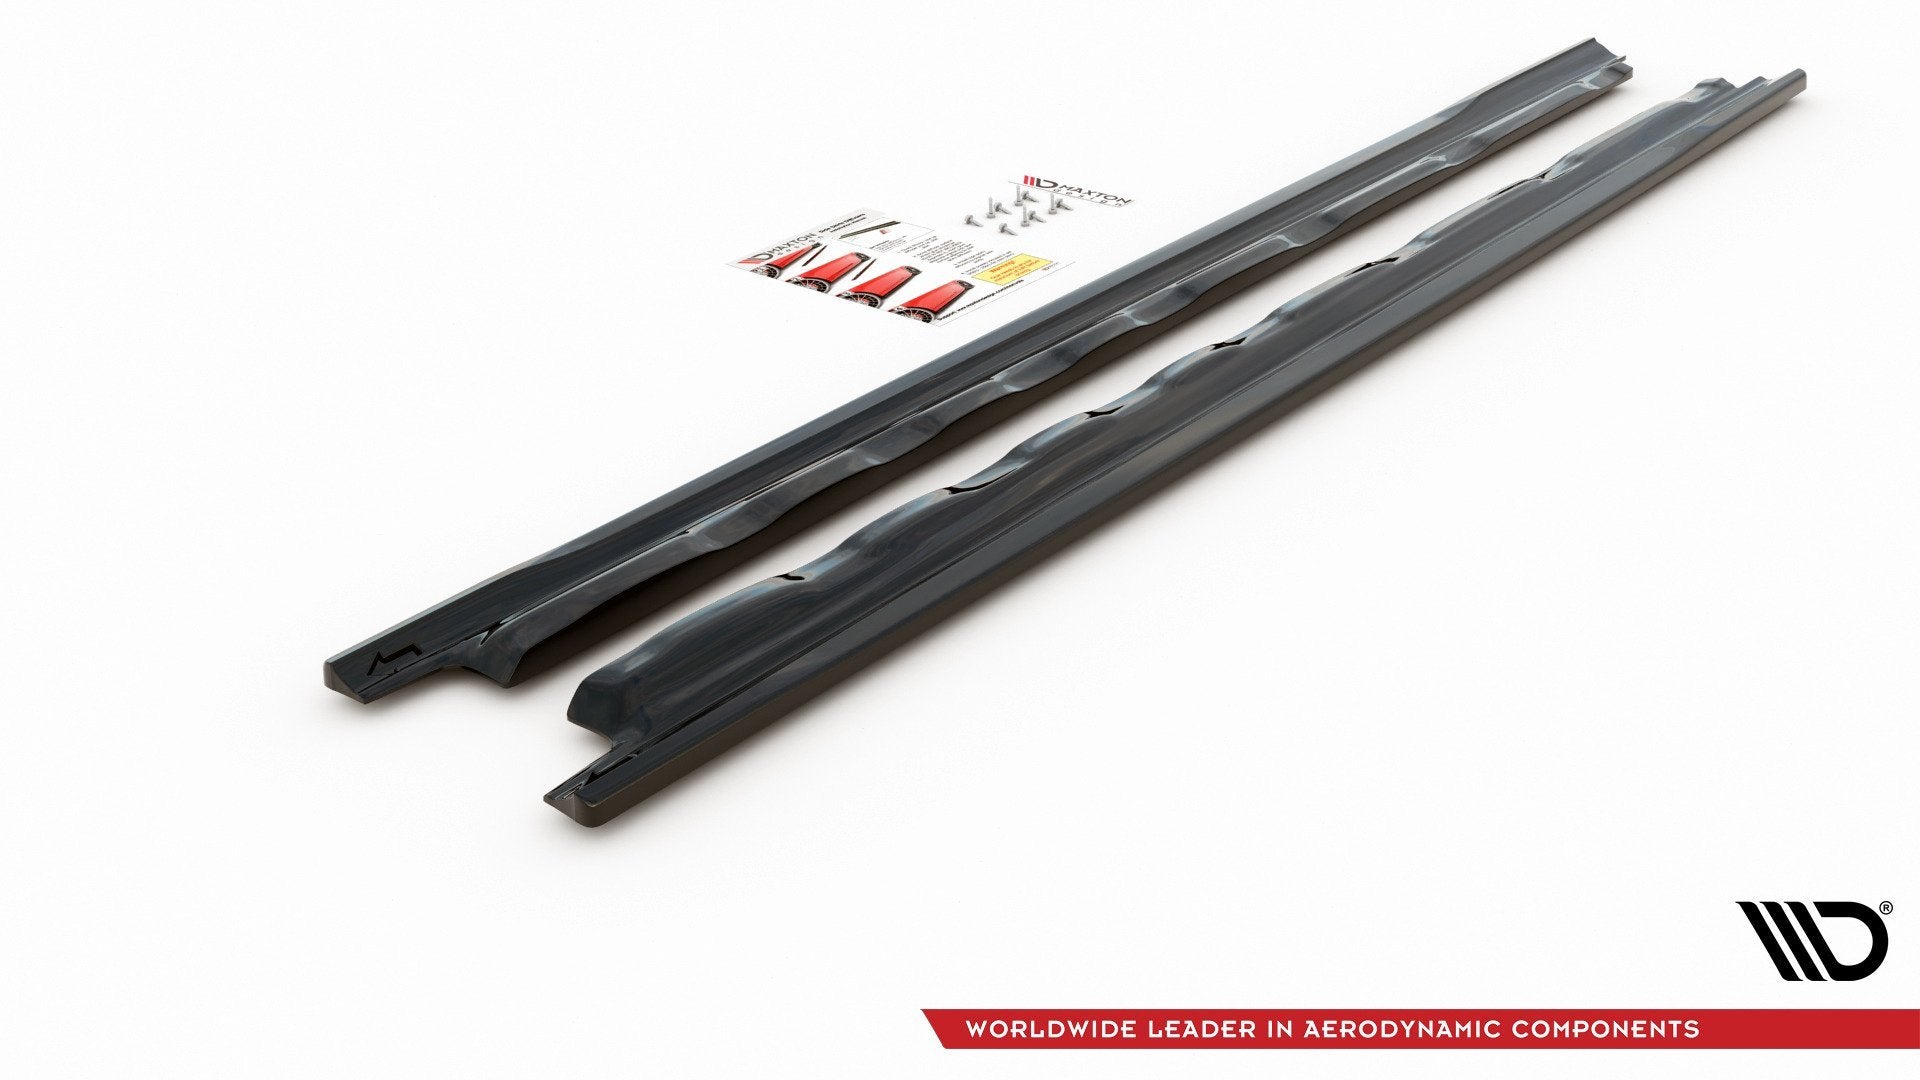 Side Skirts Diffusers V.1 VW Golf 8